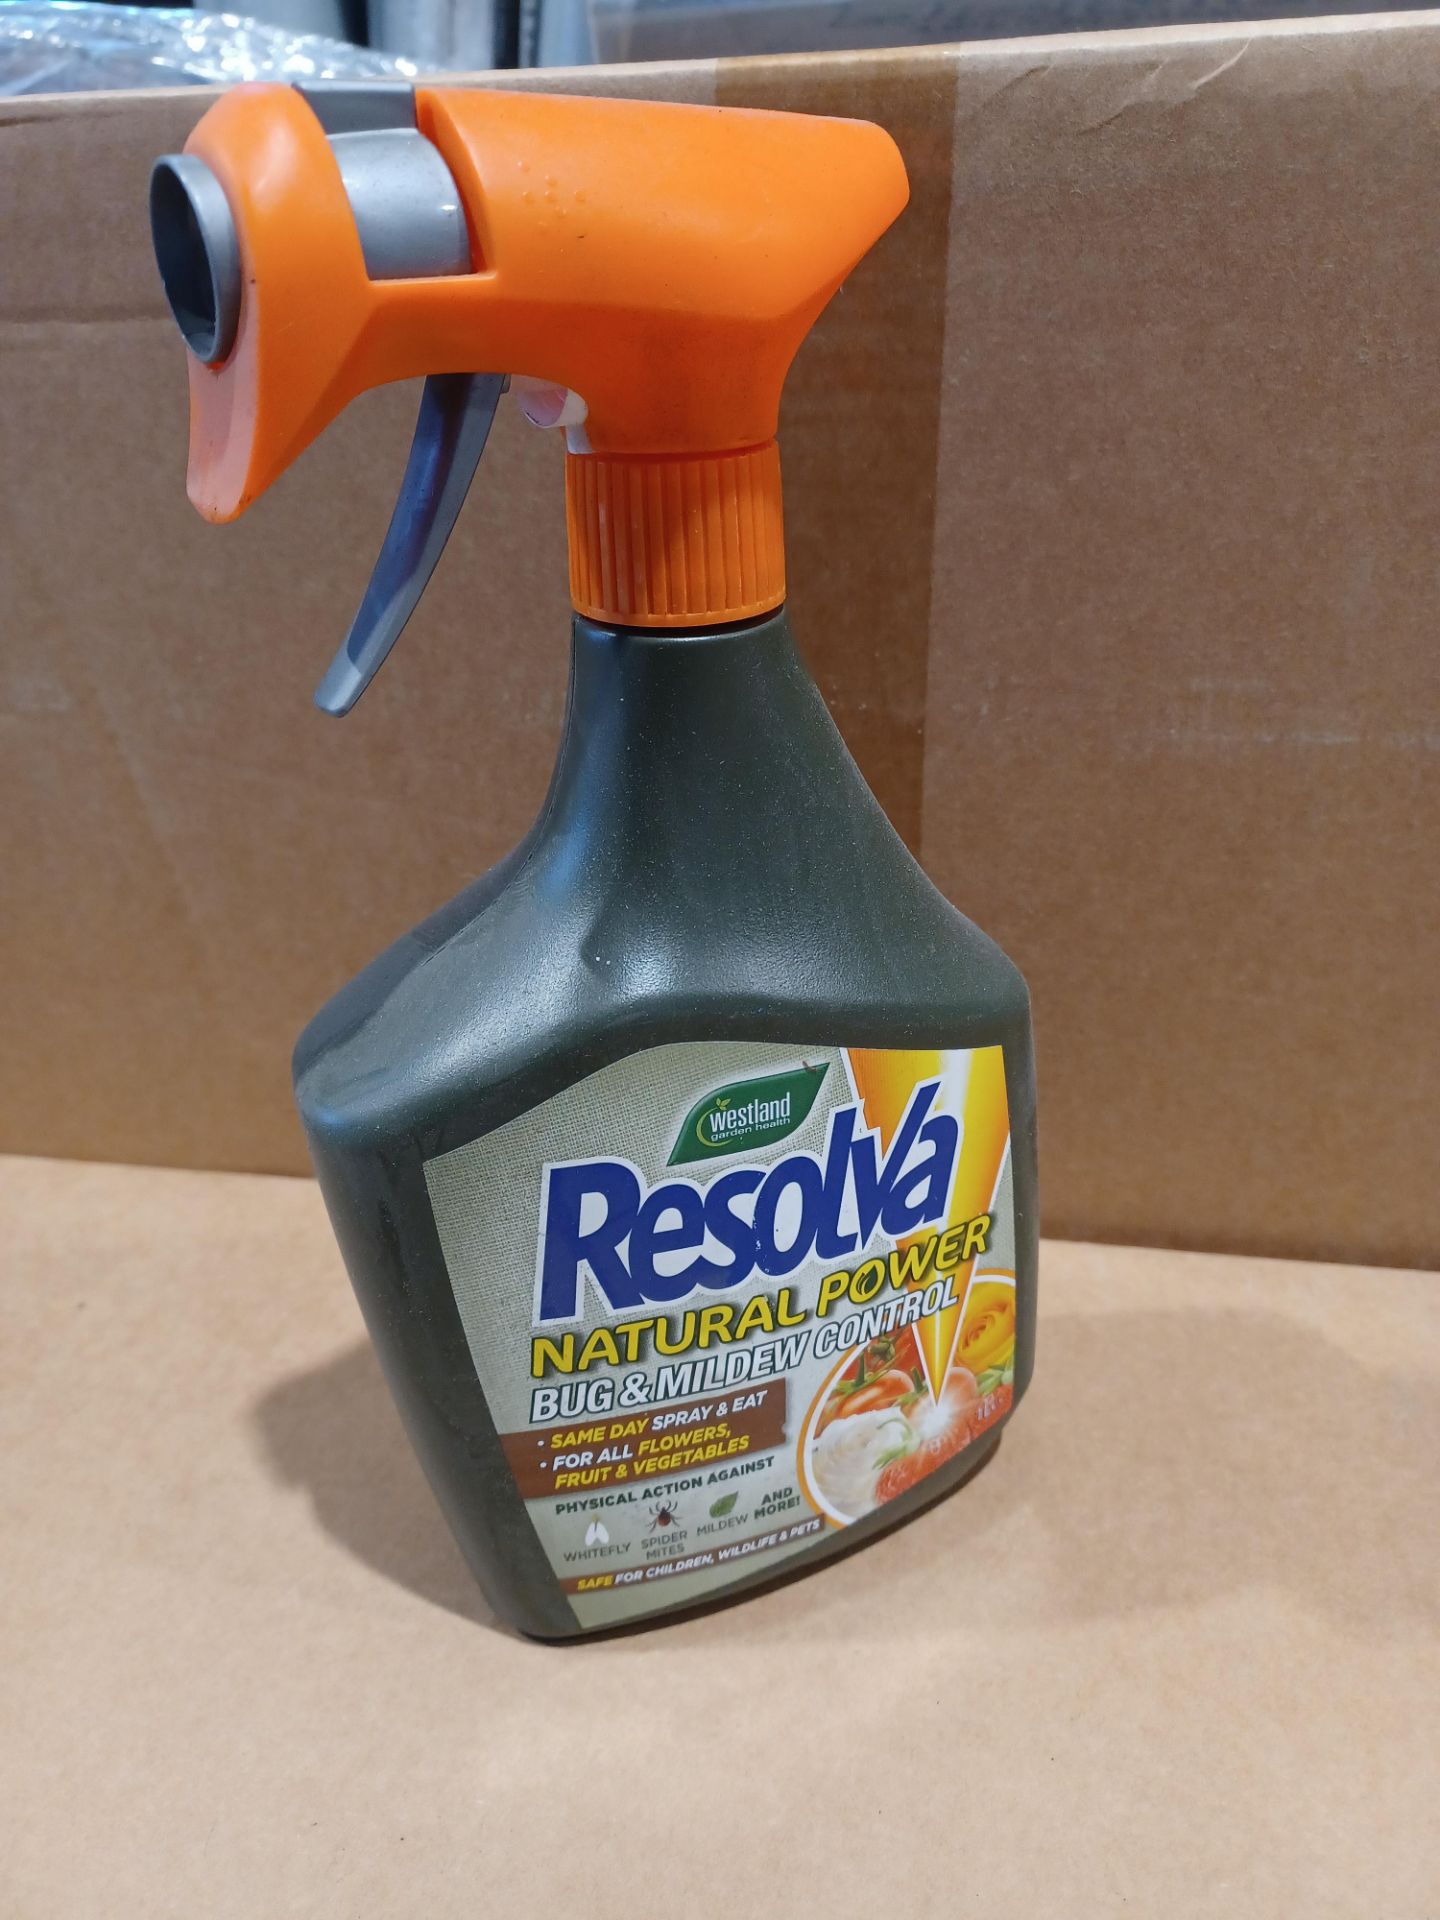 29 X BRAND NEW RESOLVA NATURAL POWER BUG AND MILDREW CONTROL 1L S1-35